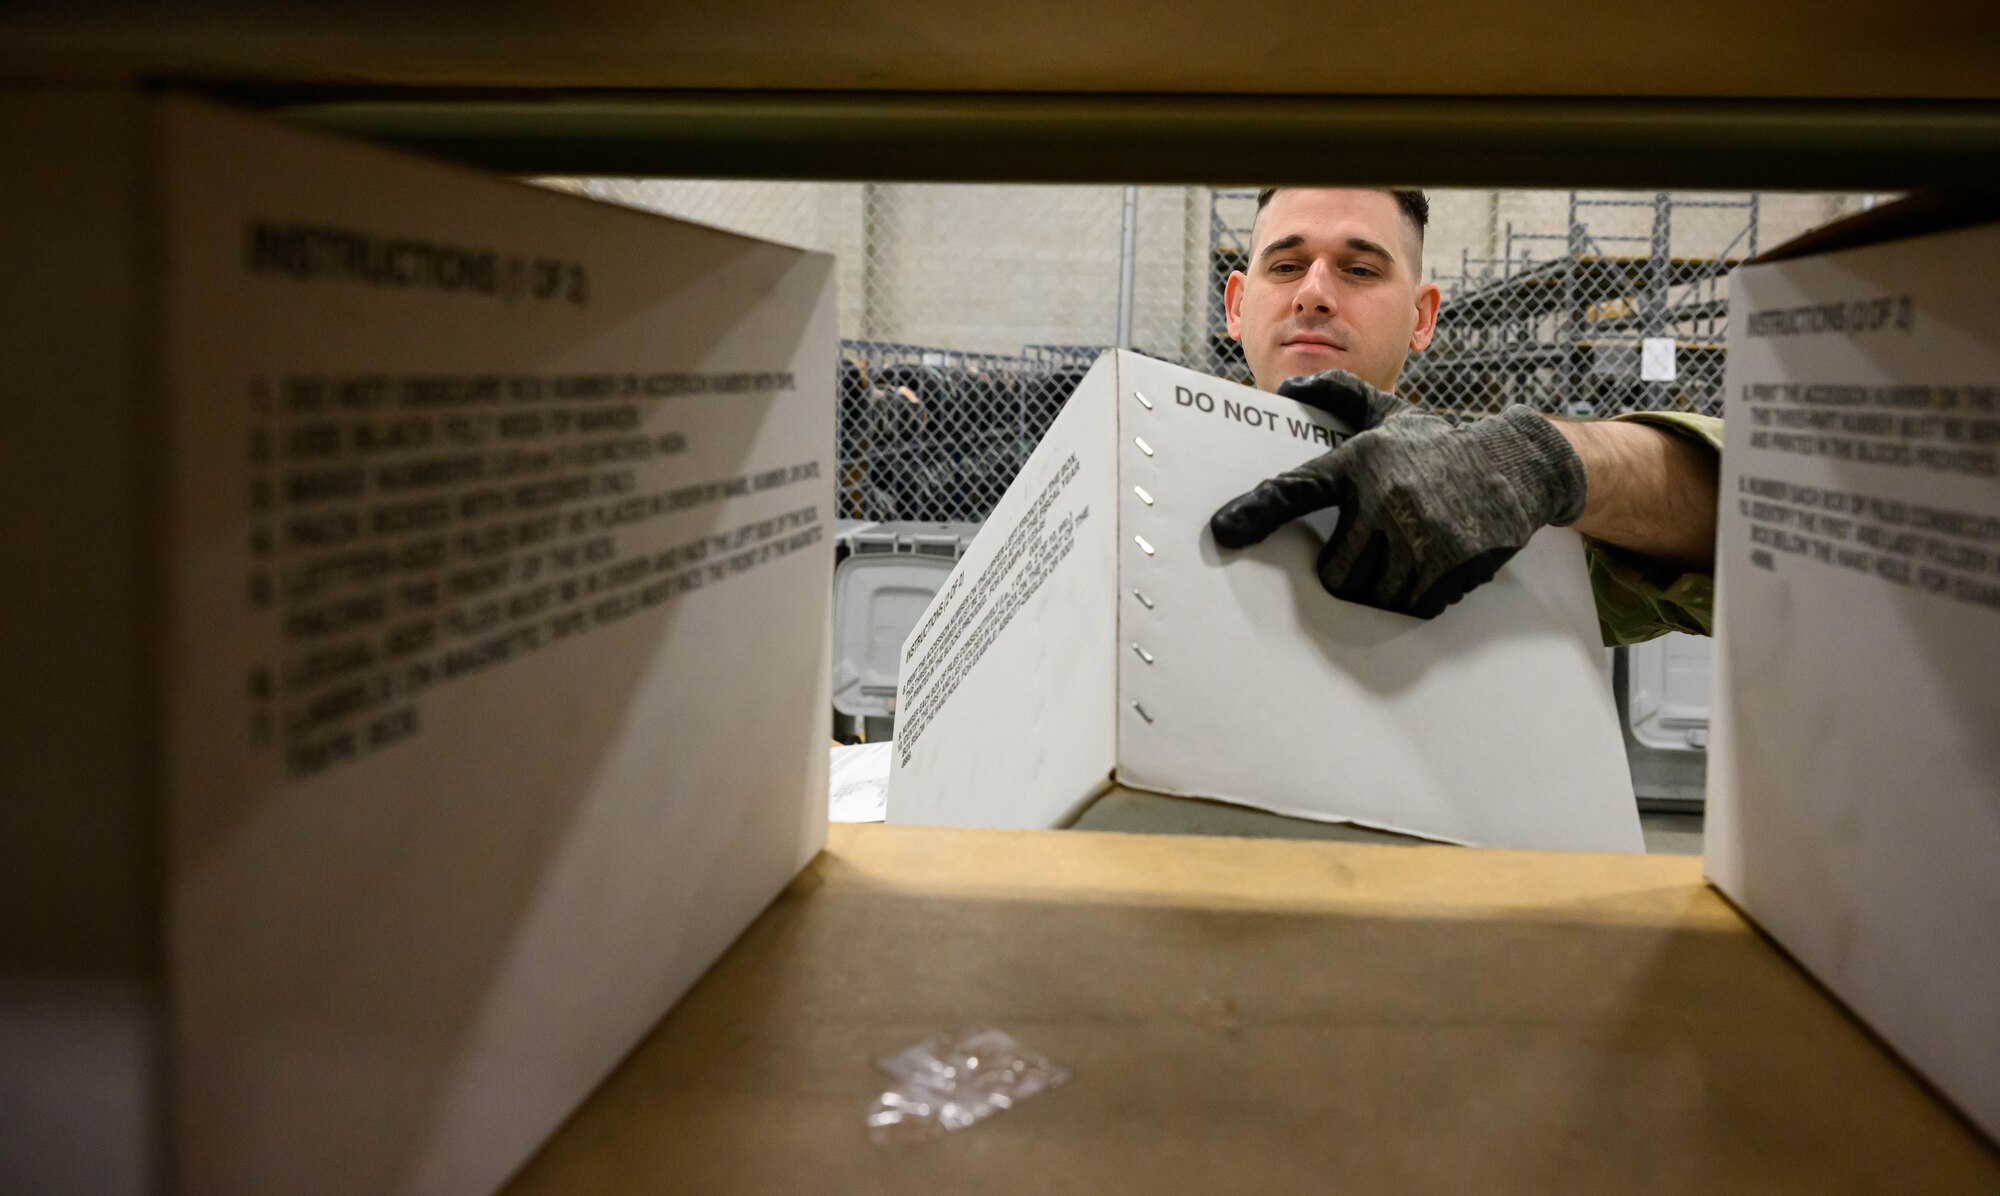 Staff Sgt. Jared Sylvester, 75th Communications and Information Directorate knowledge operations manager, processes boxed records at the Records Staging Facility at Hill Air Force Base, Utah, Dec. 22, 2022.  The Office of Management and Budget directed the Air Force to close all agency operated paper storage facilities and transfer permanent and long-retention records to Federal Records Centers operated by the National Archives and Records Administration by Dec. 31, 2022. The staging facility at Hill provided supported to more than 100 organizations. (U.S. Air Force photo by R. Nial Bradshaw)